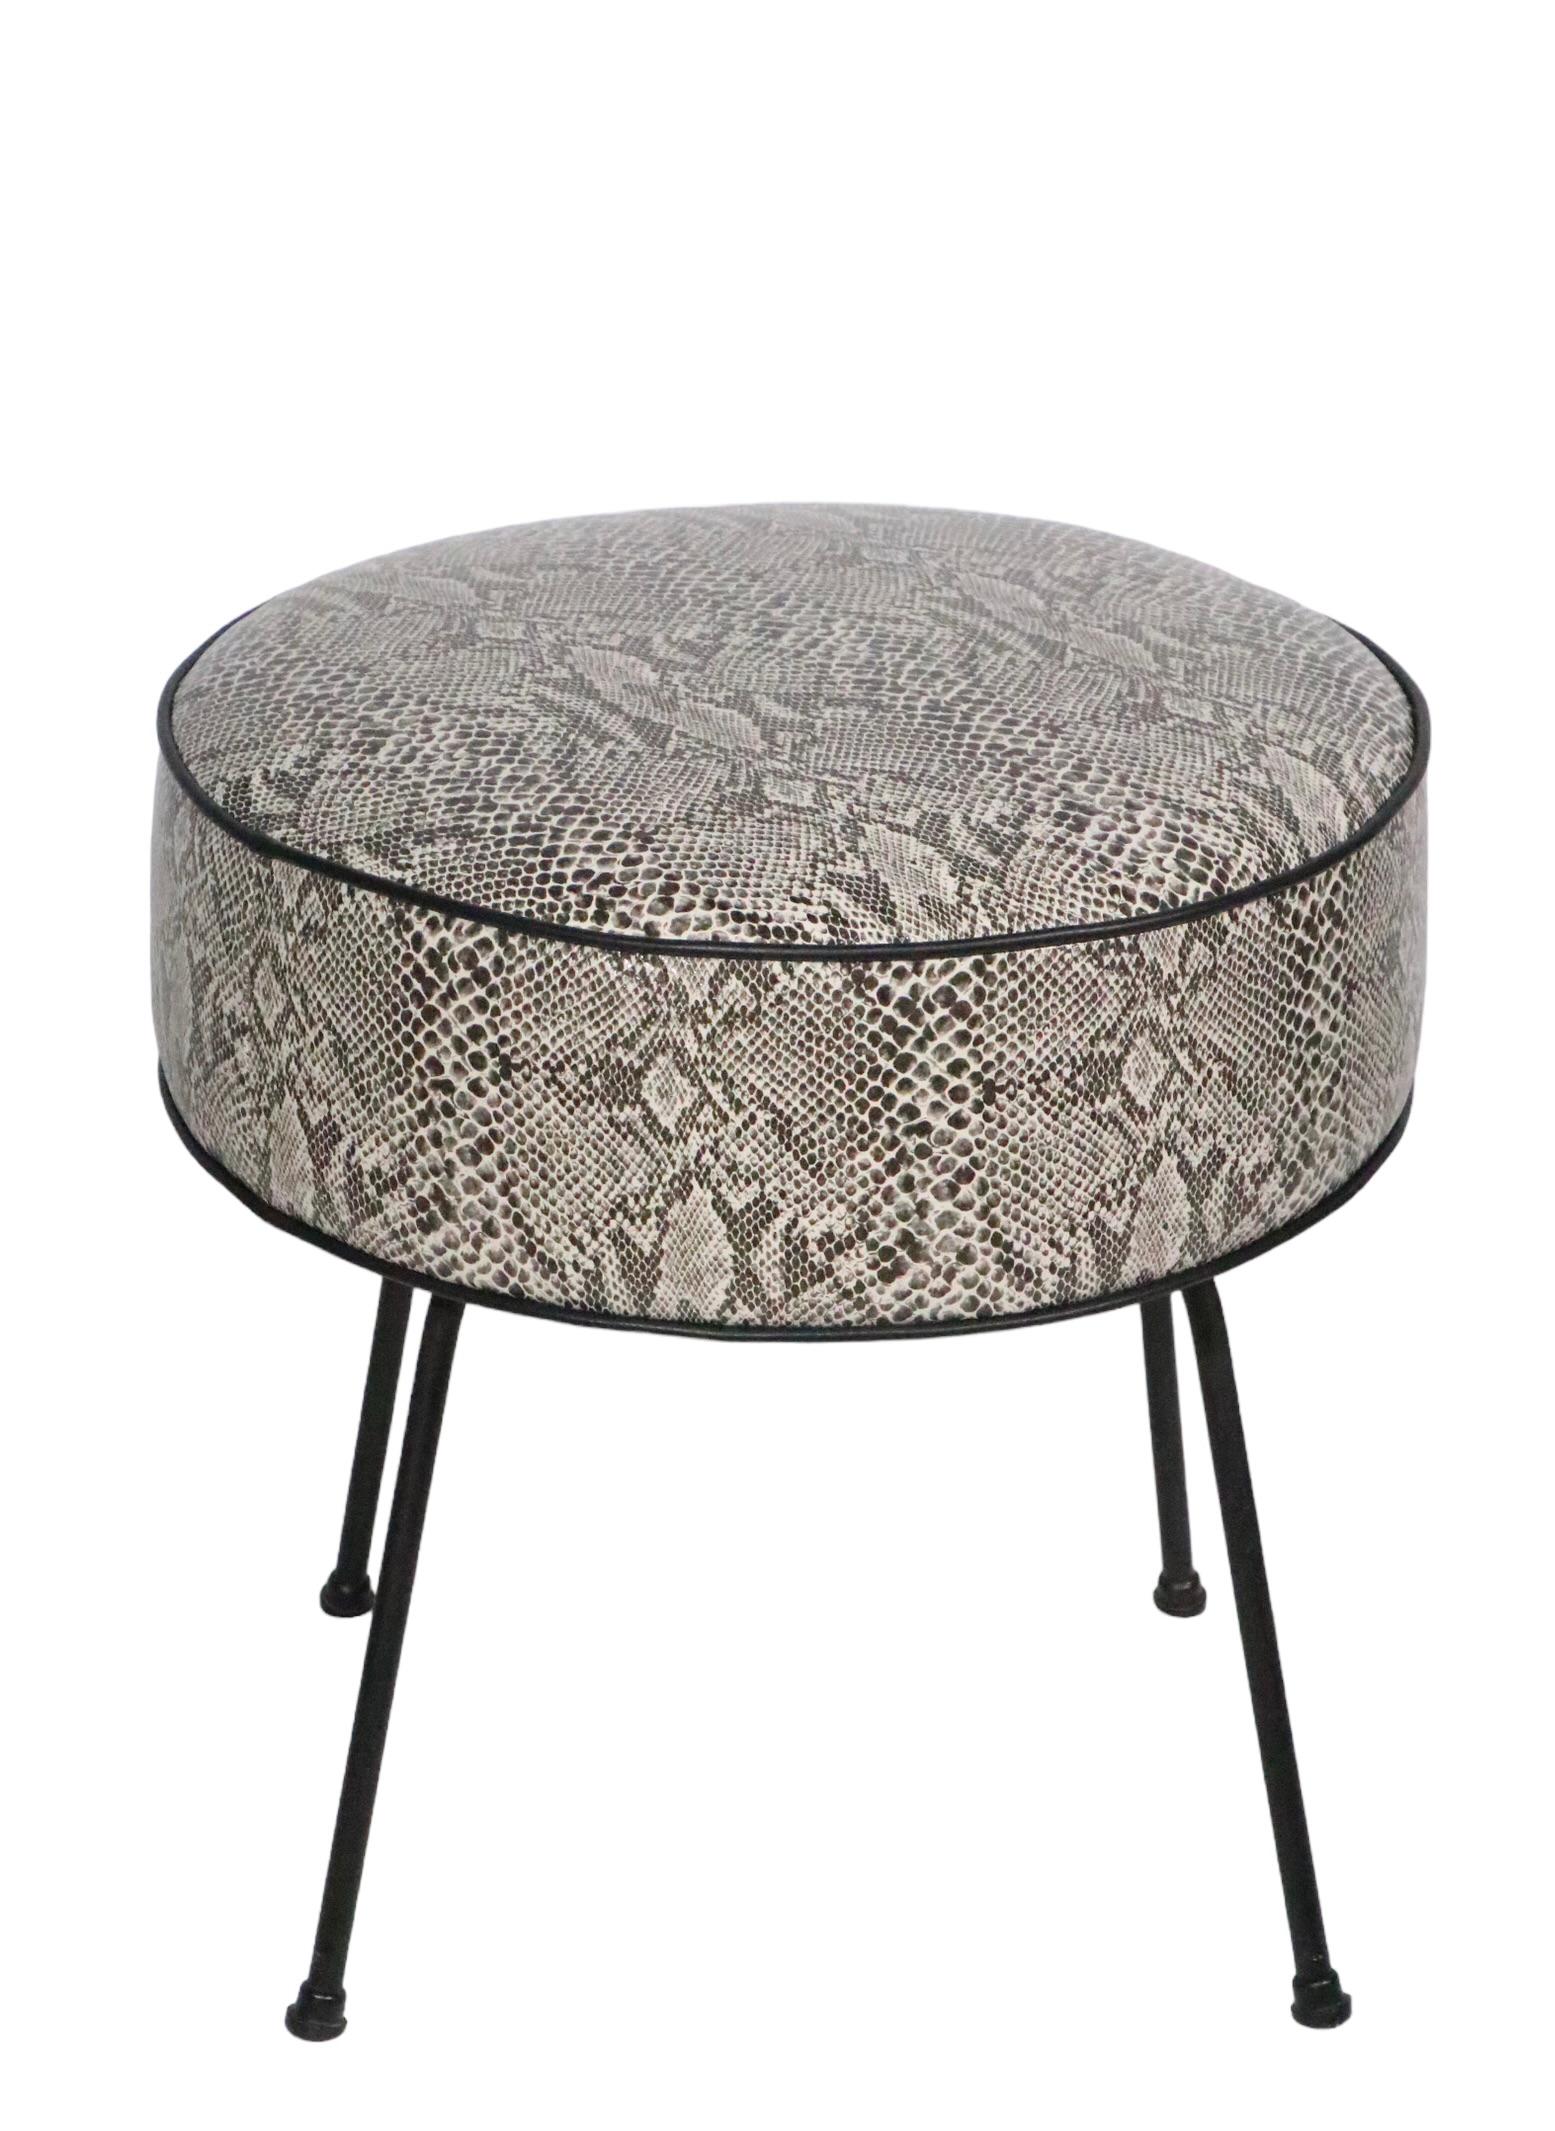 Mid Century Foot Stool Pouf Ottoman Reupholstered in Black and White Faux Python 7